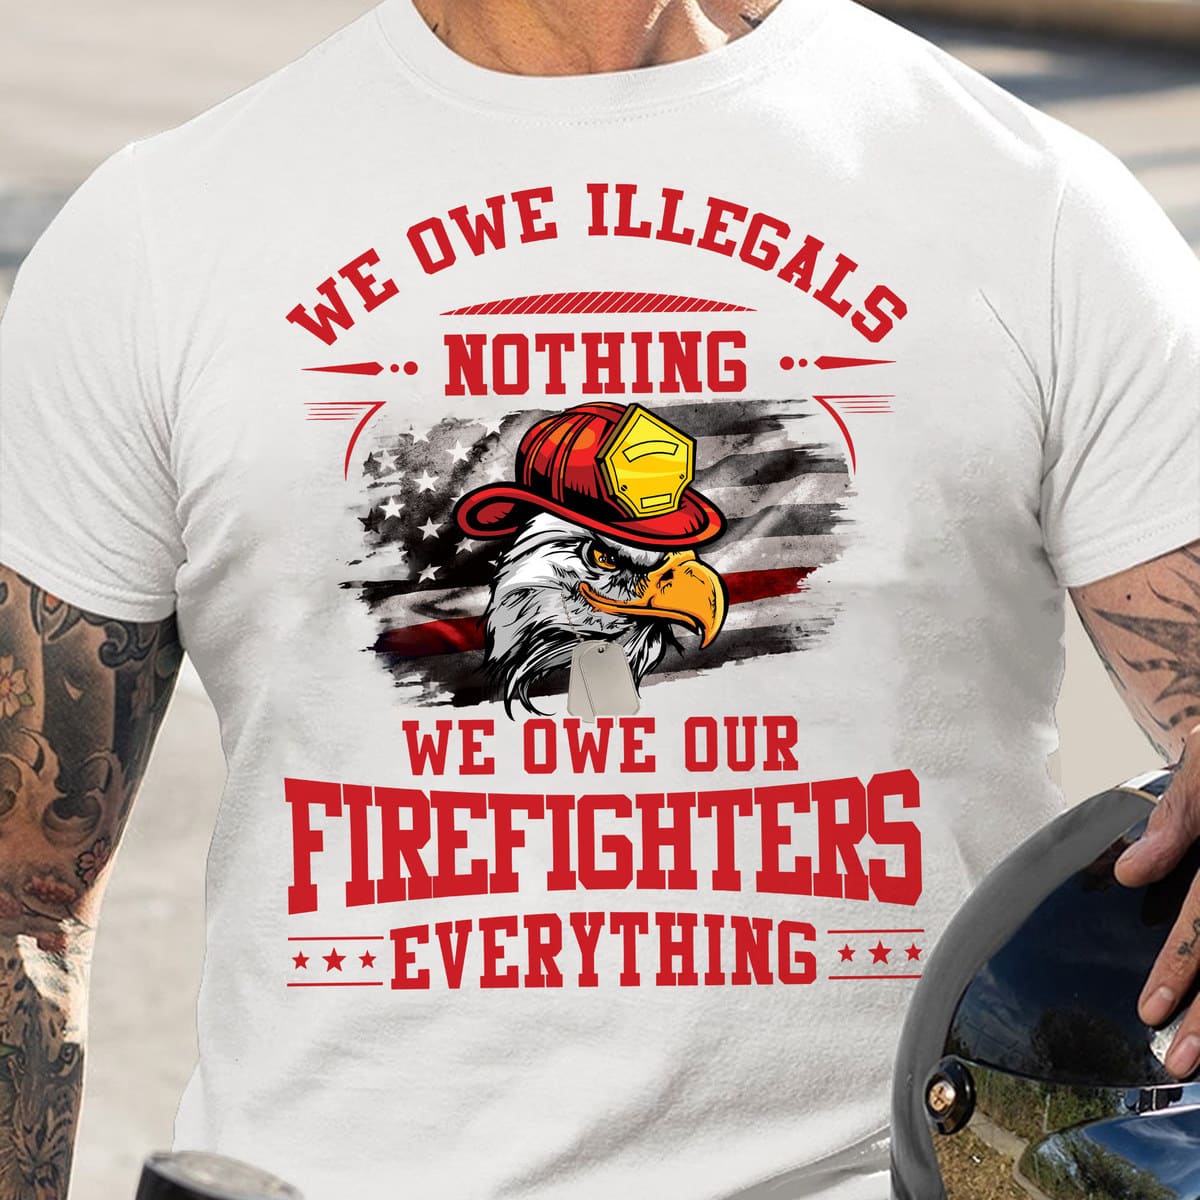 We owe illegals nothing, we owe firefighters everything - Eagle firefighter, firefighter lifesaver